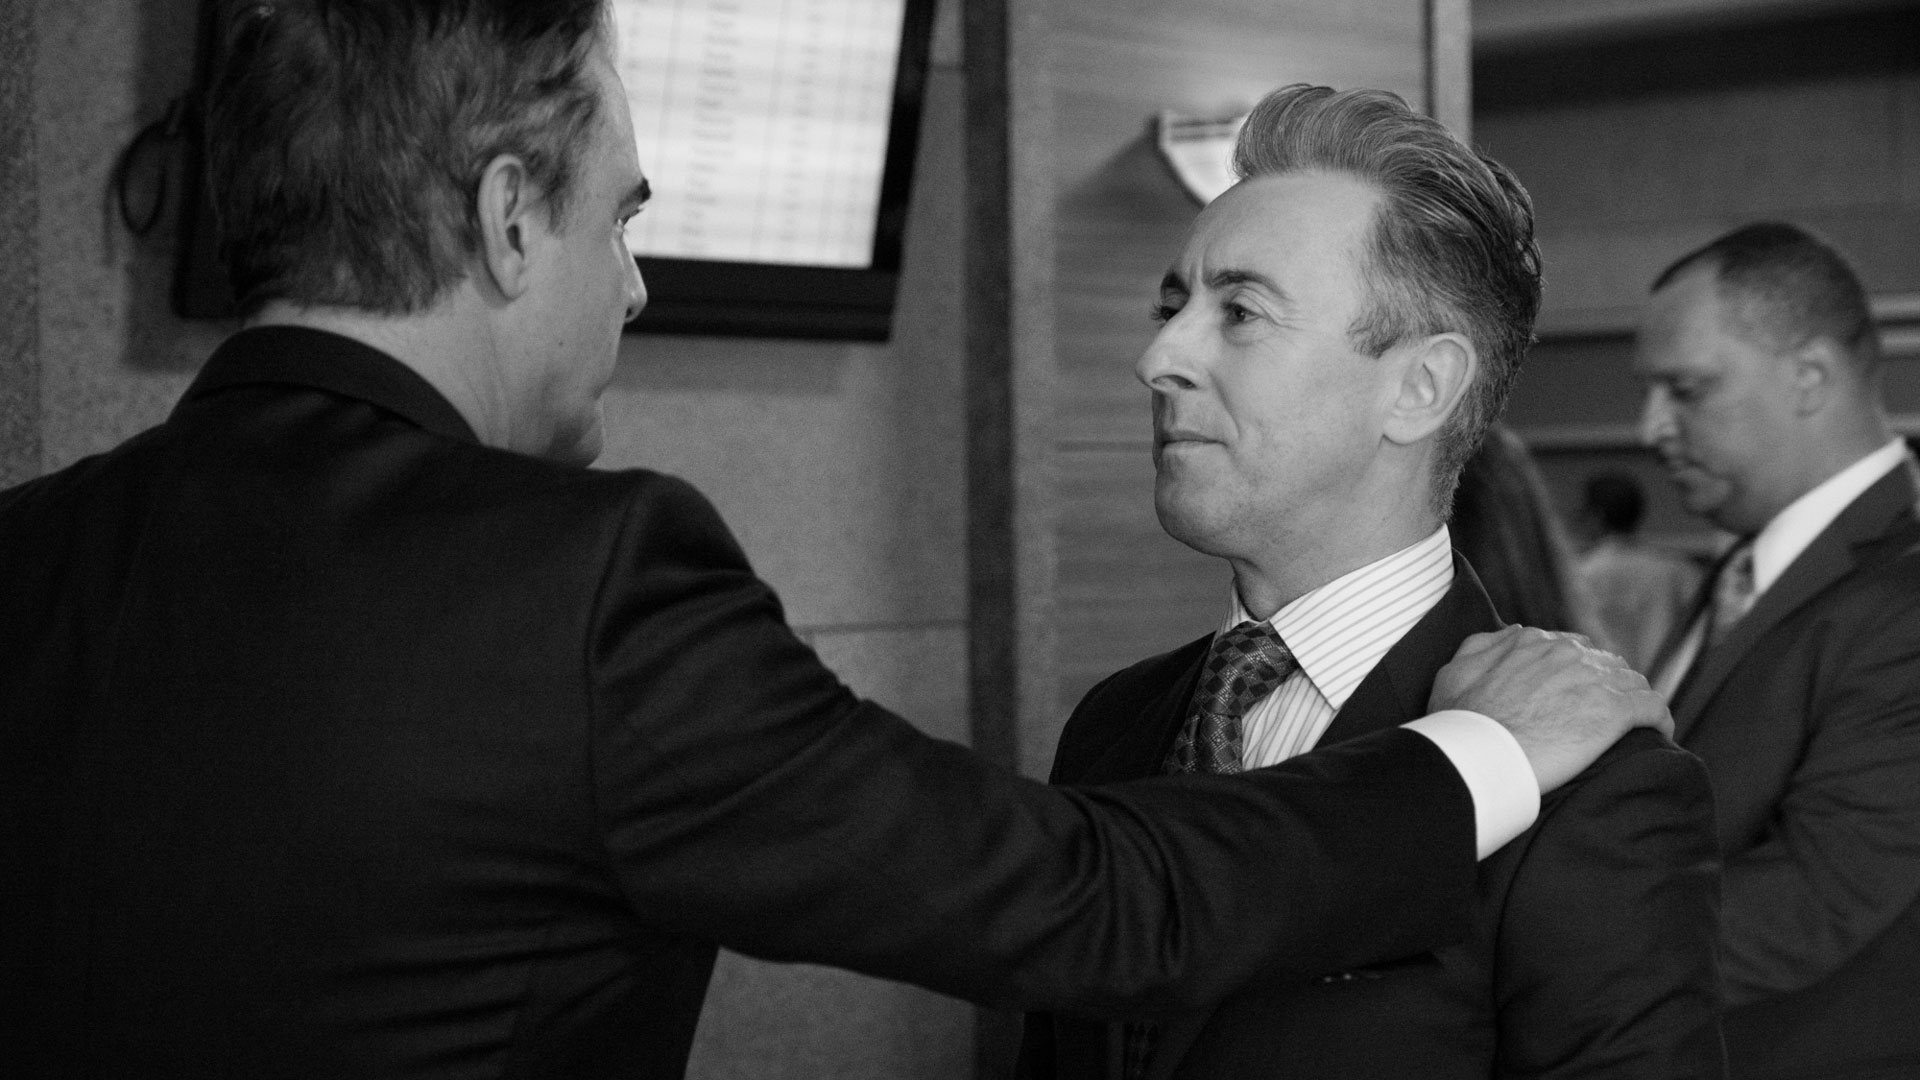 Chris Noth and Alan Cumming share a moment.